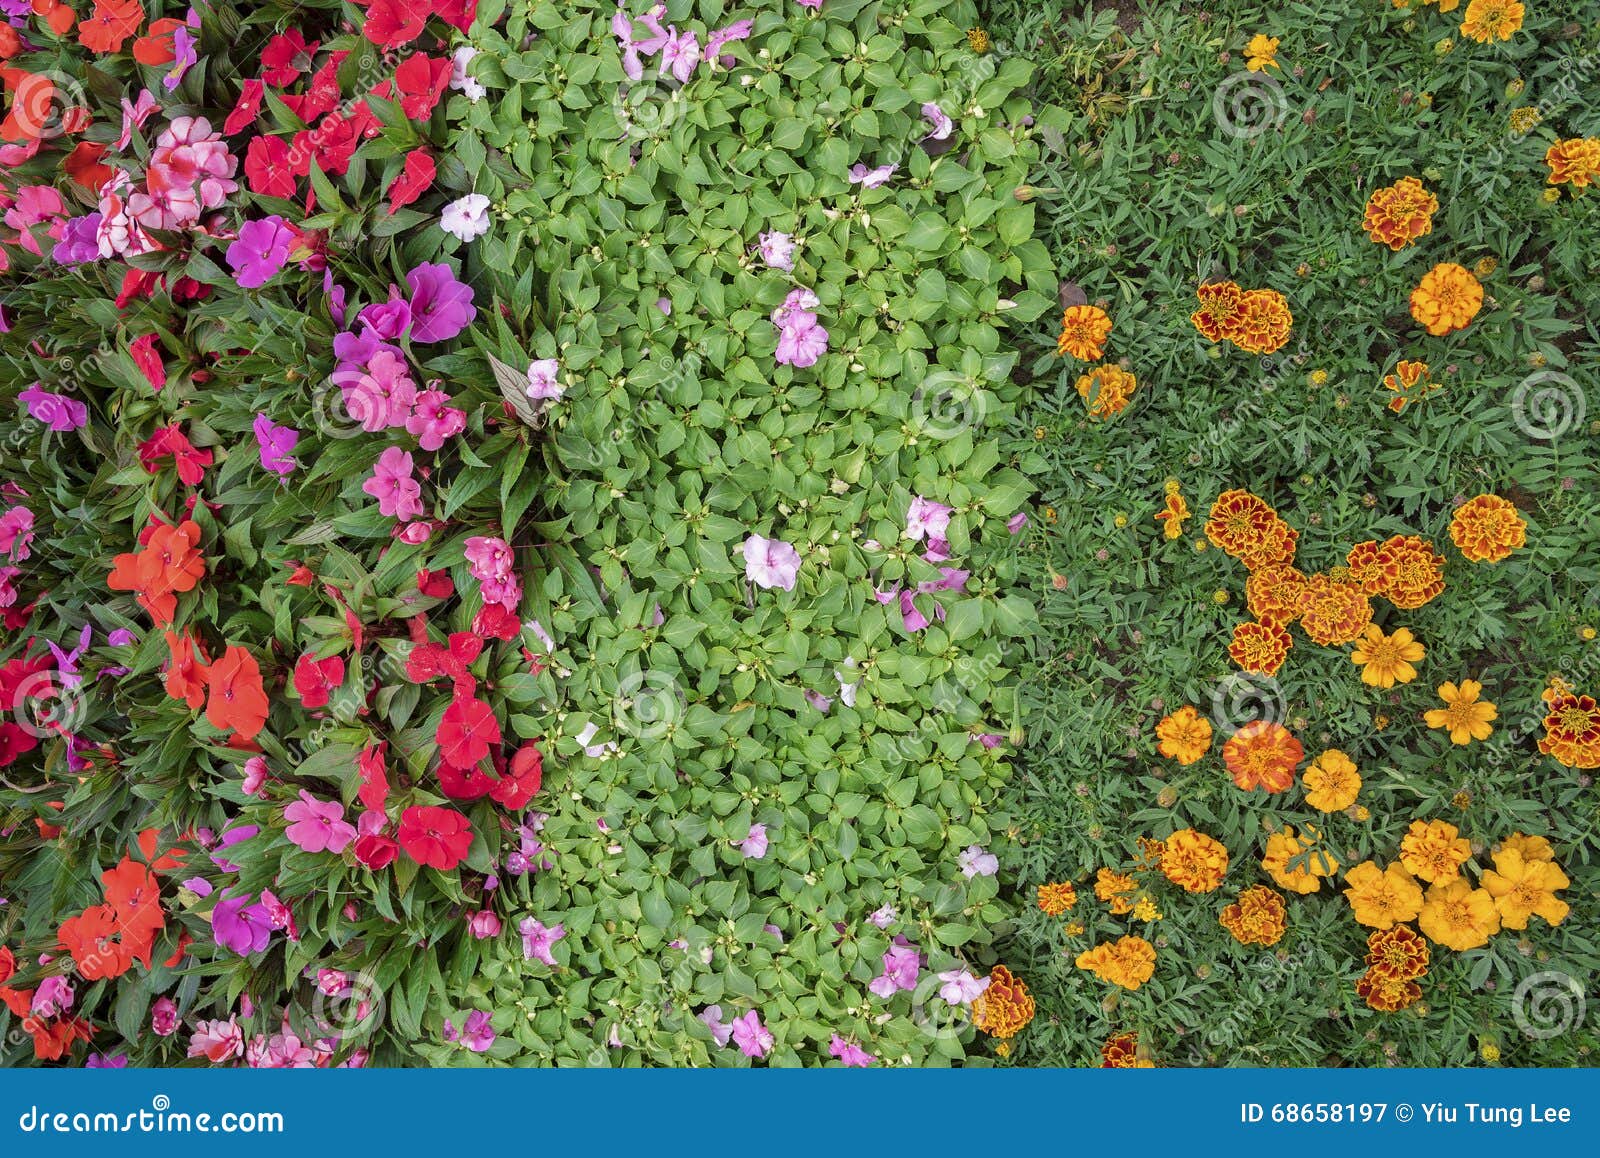 Flower background stock image. Image of outdoor, floral - 68658197